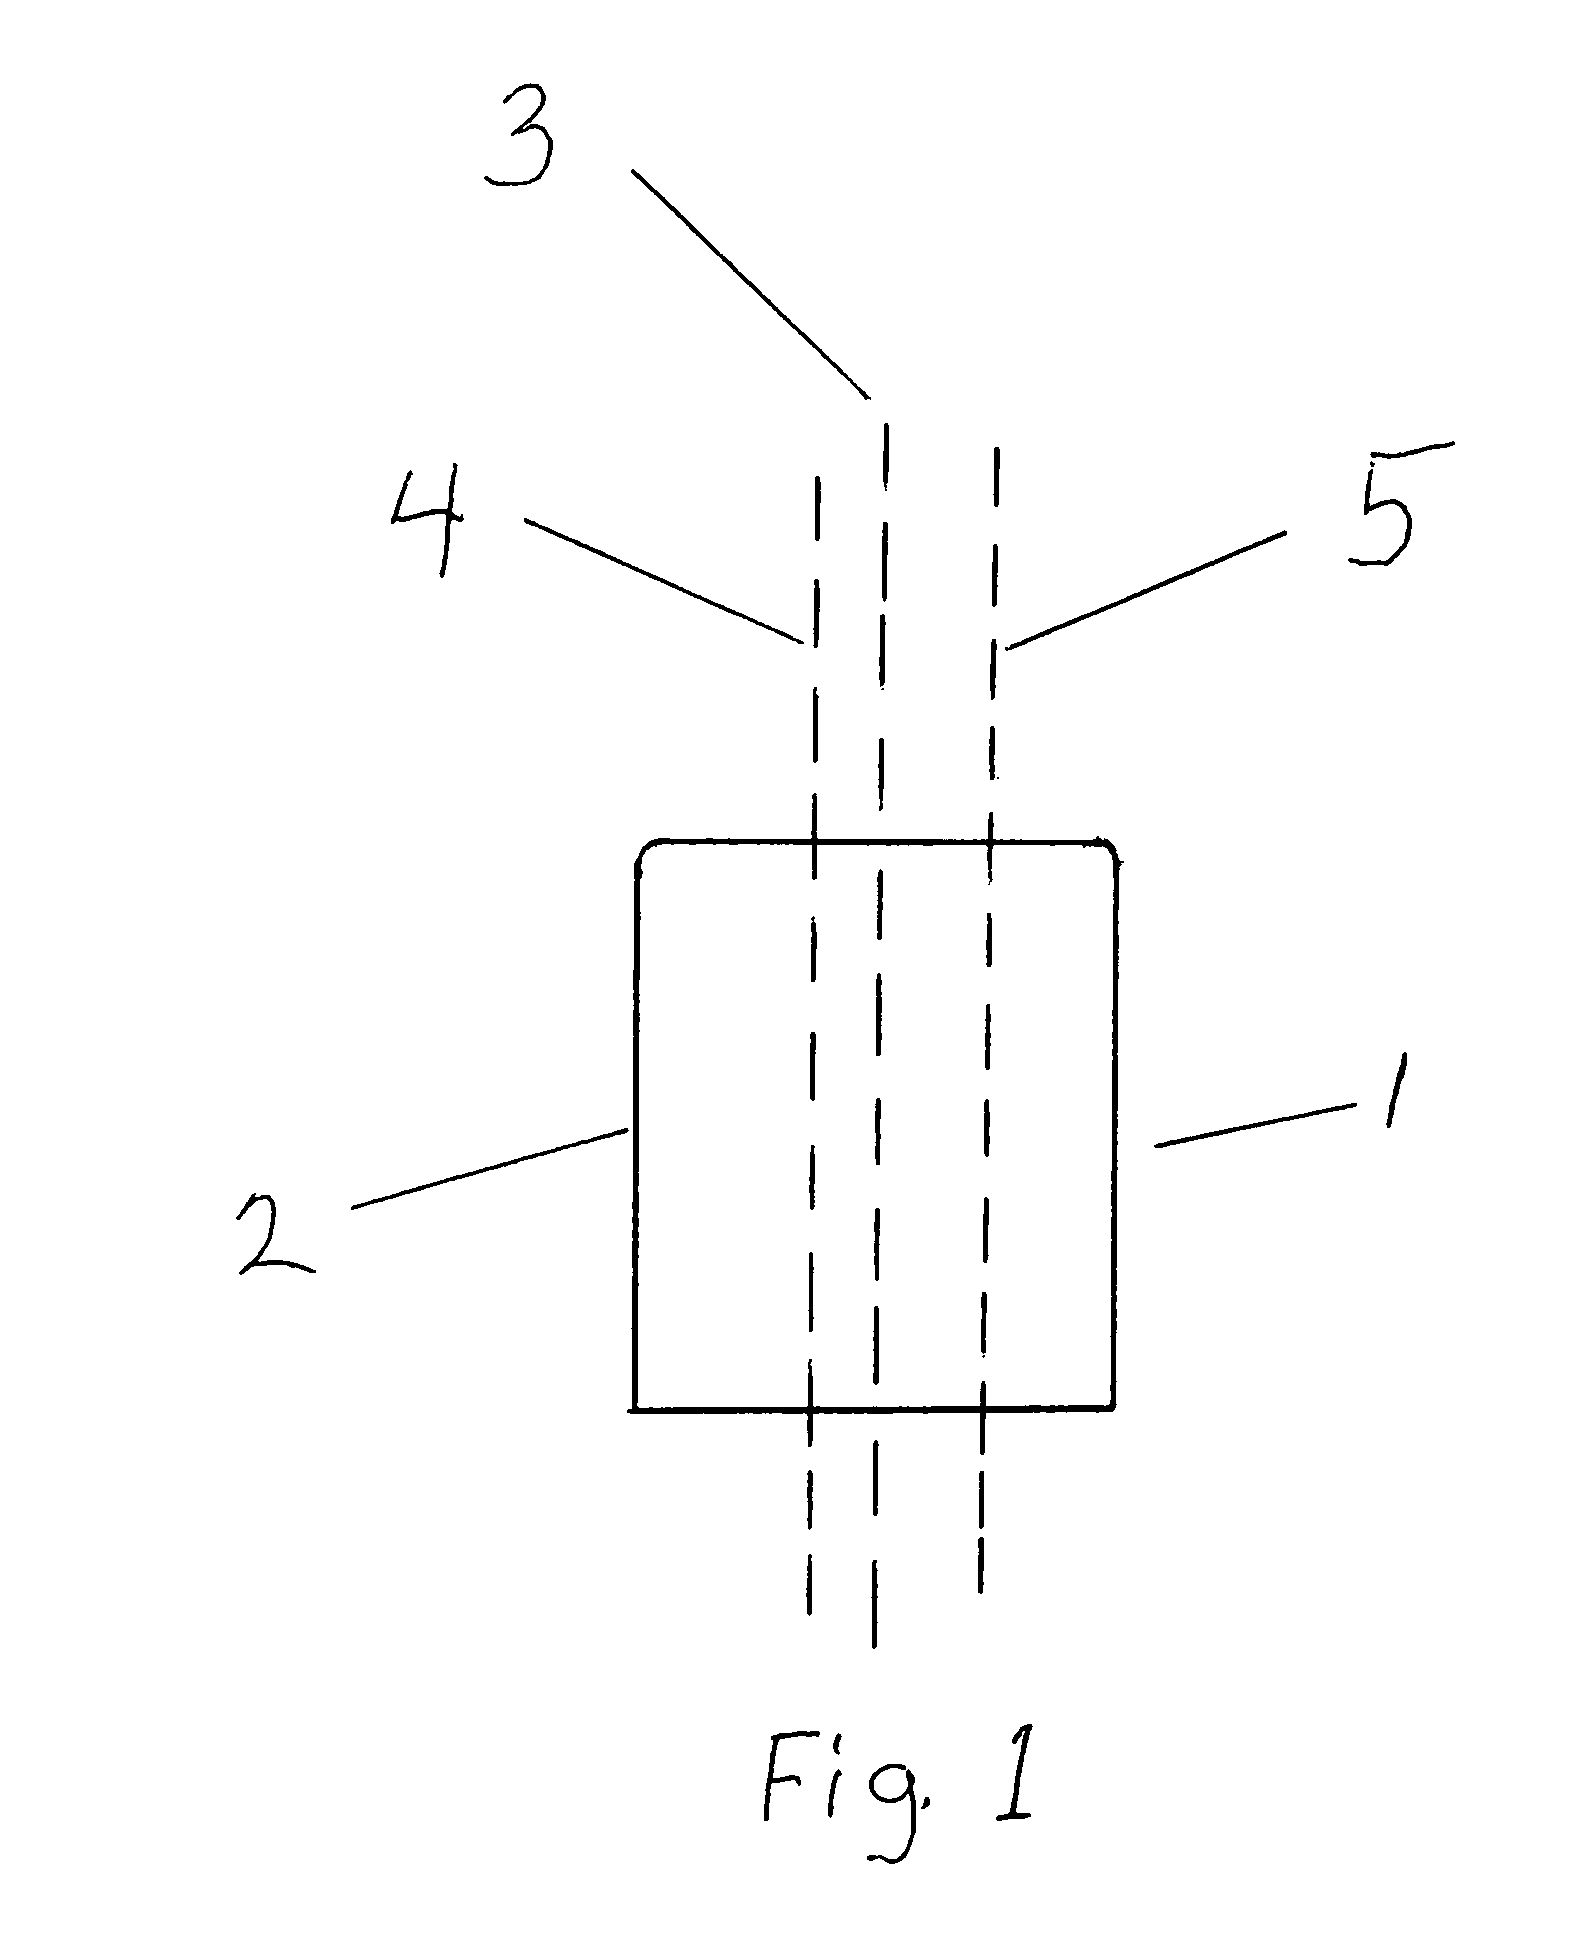 Gun firing method for the simultaneous dispersion of projectiles in a pattern